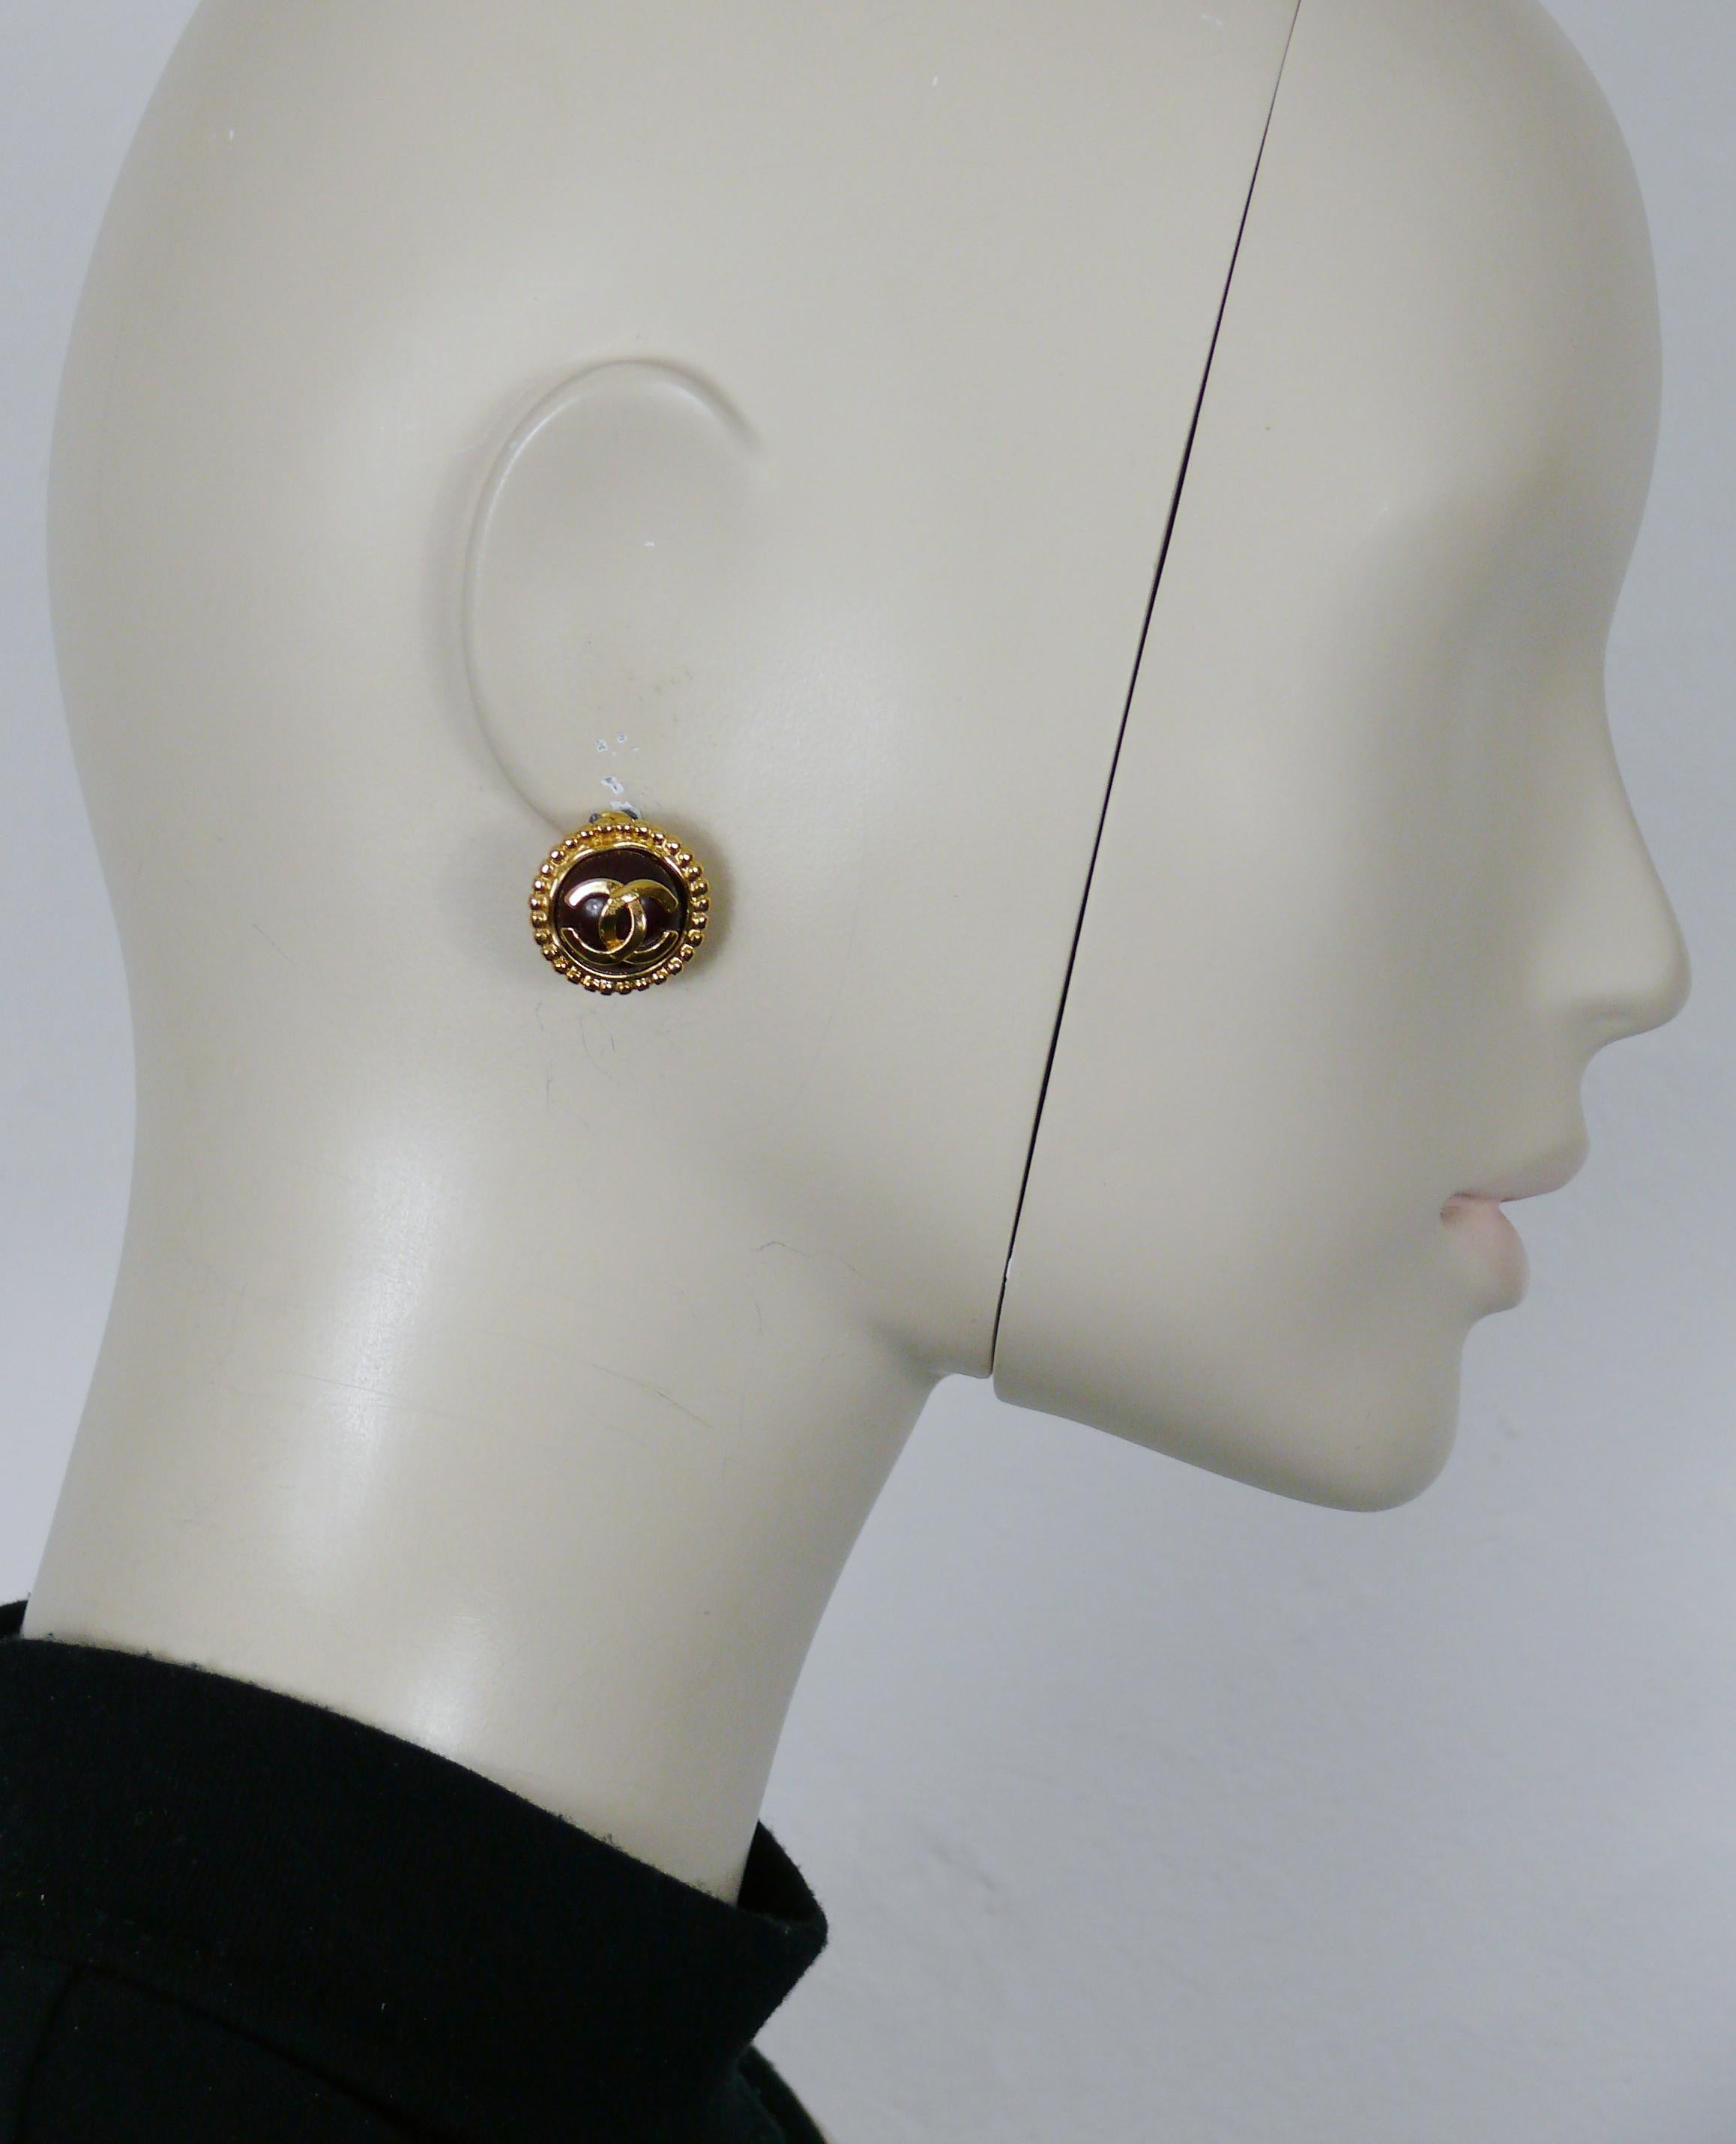 CHANEL by KARL LAGERFELD vintage gold tone clip-on earrings embellished with a MAISON GRIPOIX red domed glass cabochon and a CC logo at the center.

From the Fall 1997 collection.

Embossed CHANEL 97 A Made in France.

Indicative measurements :